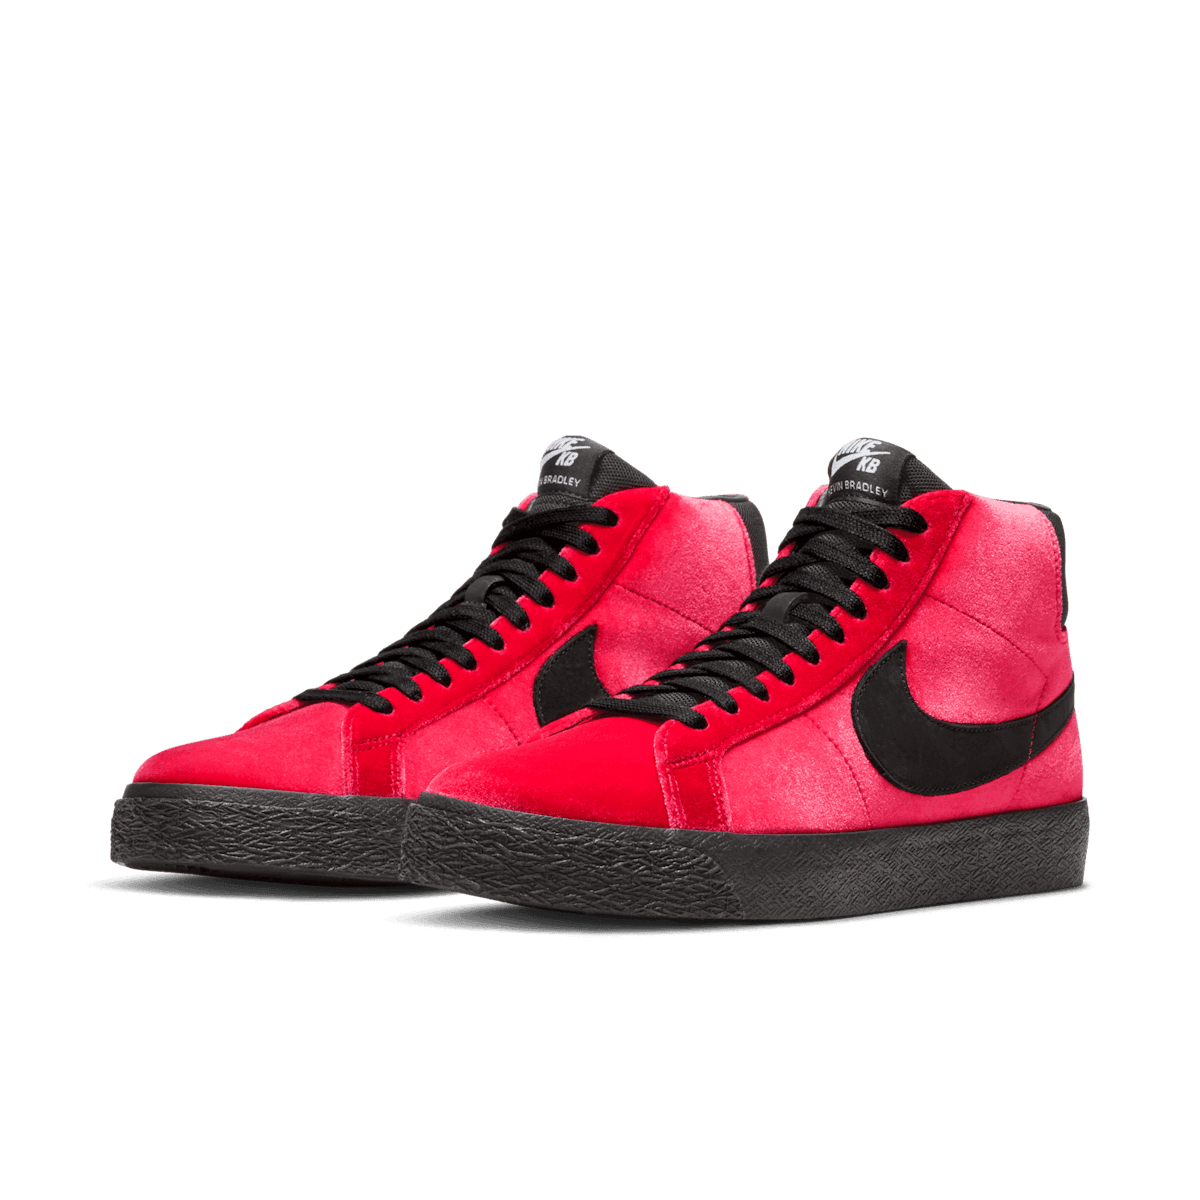 Nike SB Zoom Blazer Mid Kevin and Hell "Hell" Angle 2